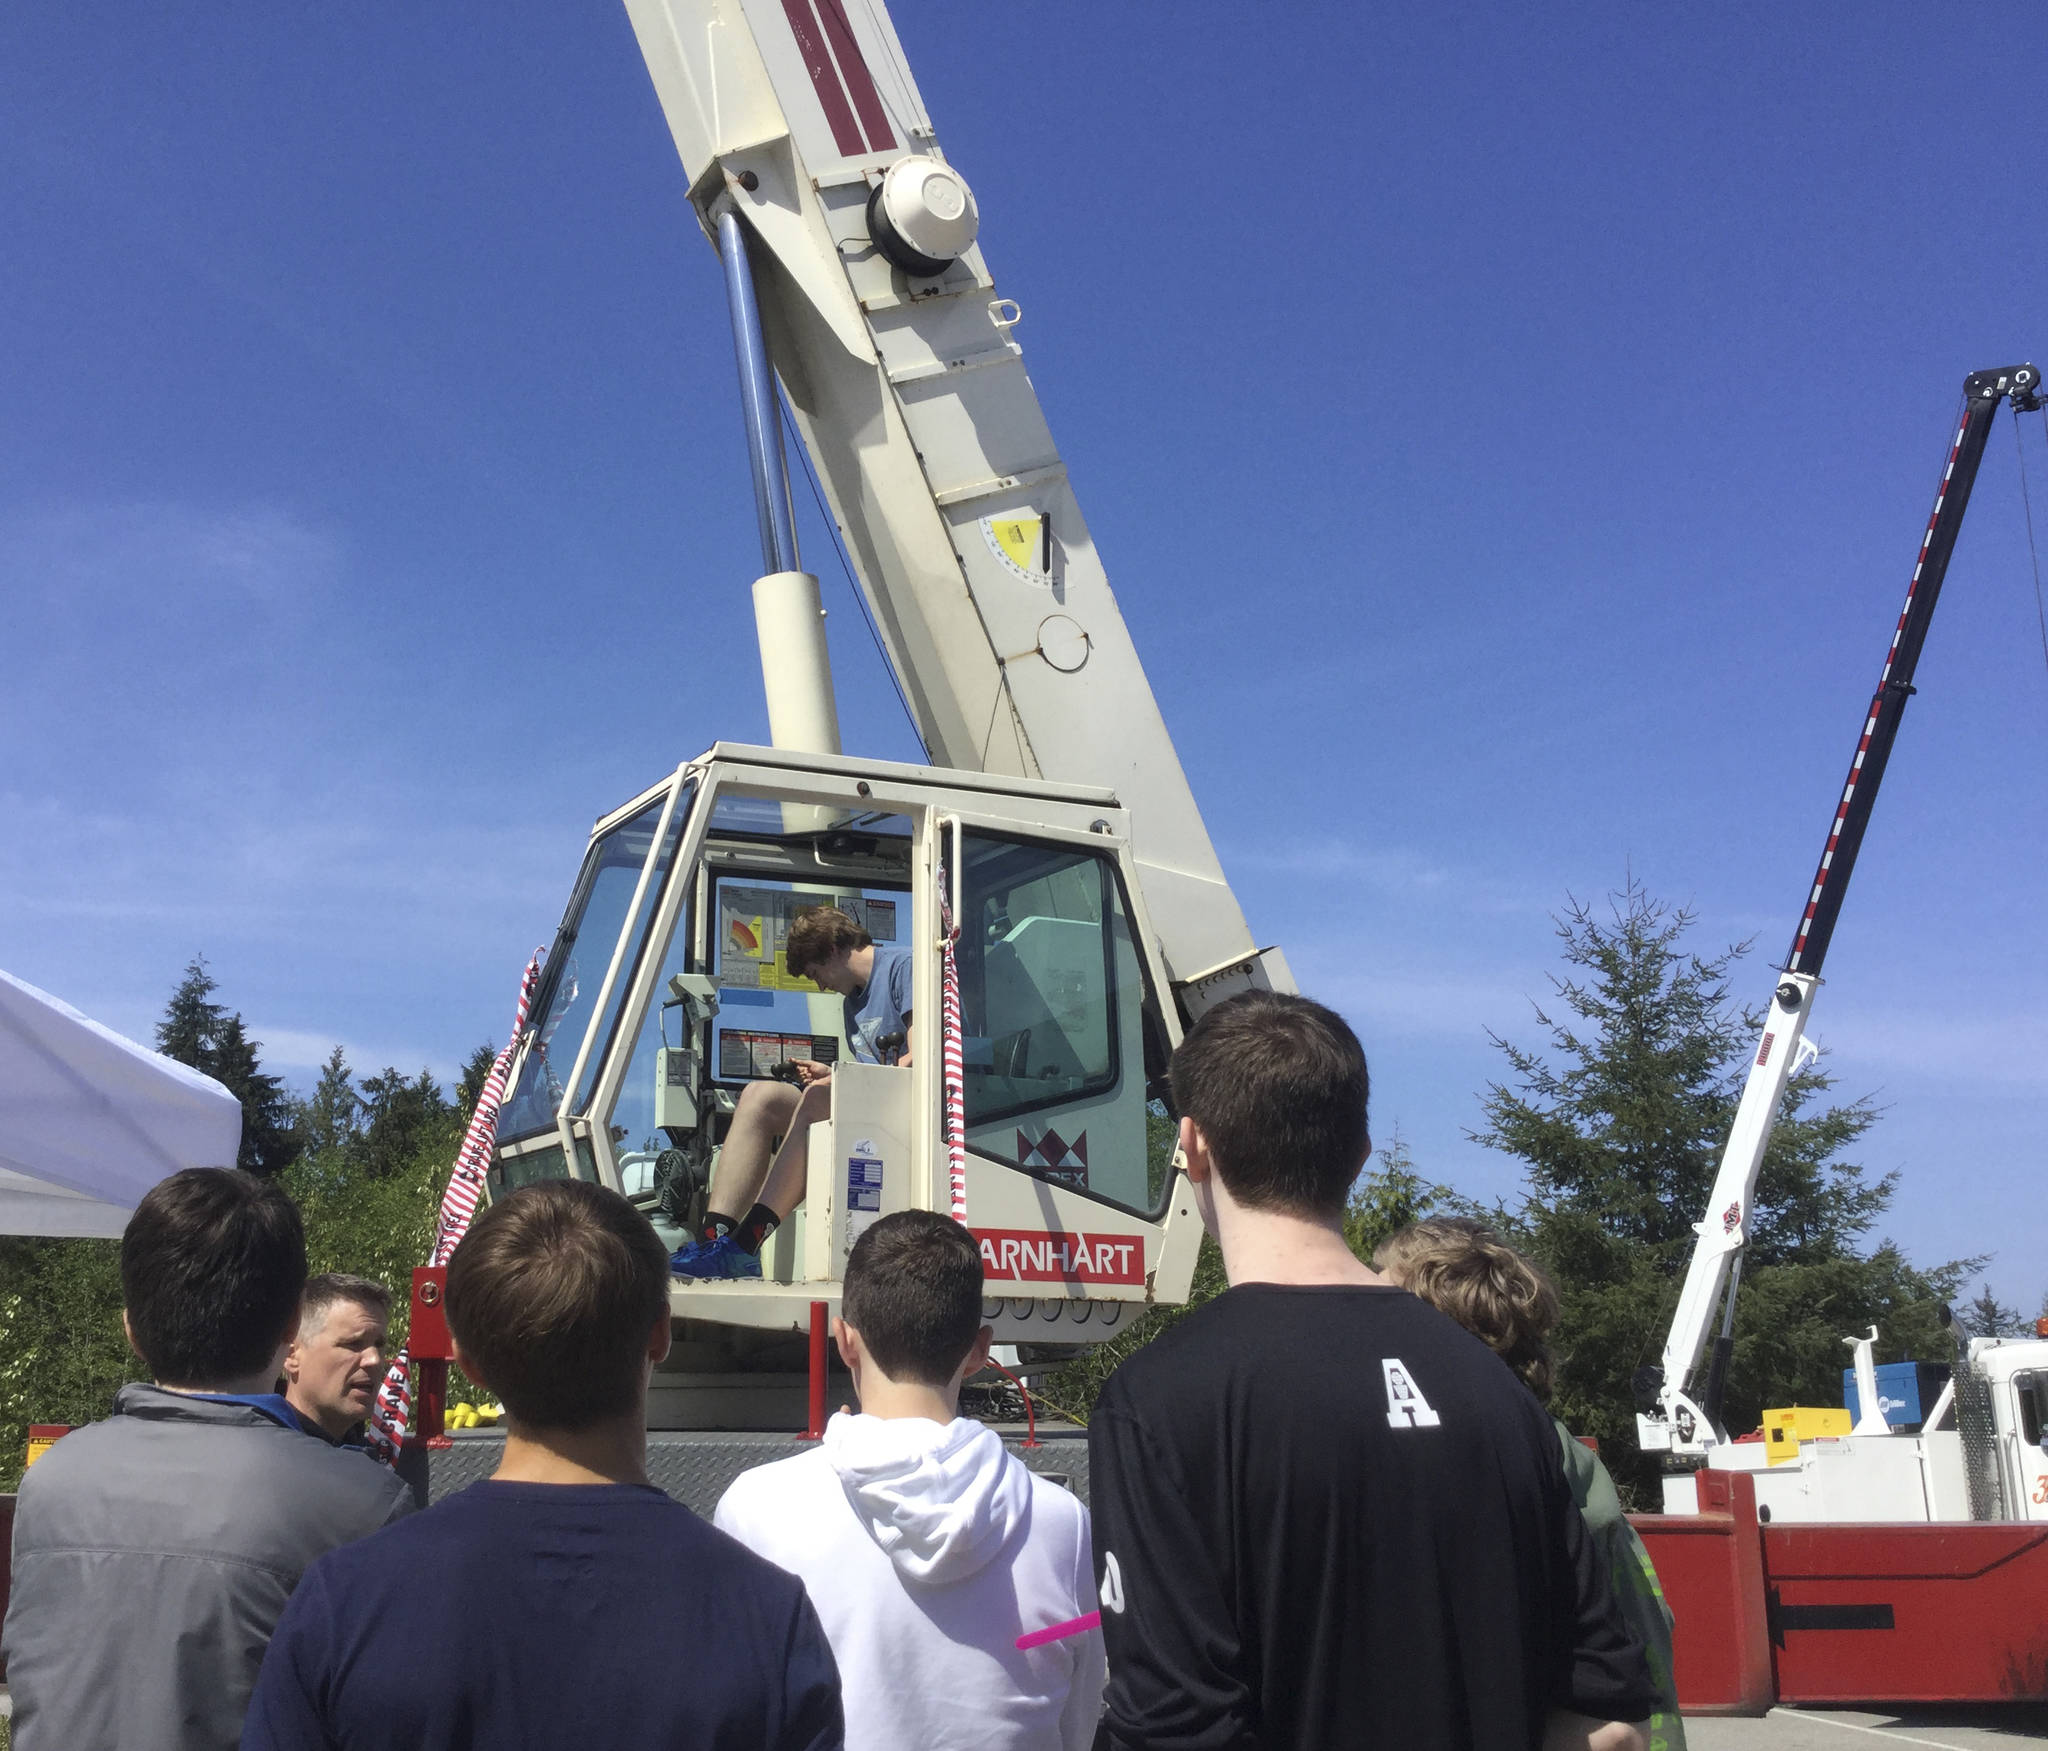 Arlington High School Junior Jonathan Schroeder takes his turn in the crane cab while Barnhart Crane & Rigging worker Ben Walthers talks about the industry with students.